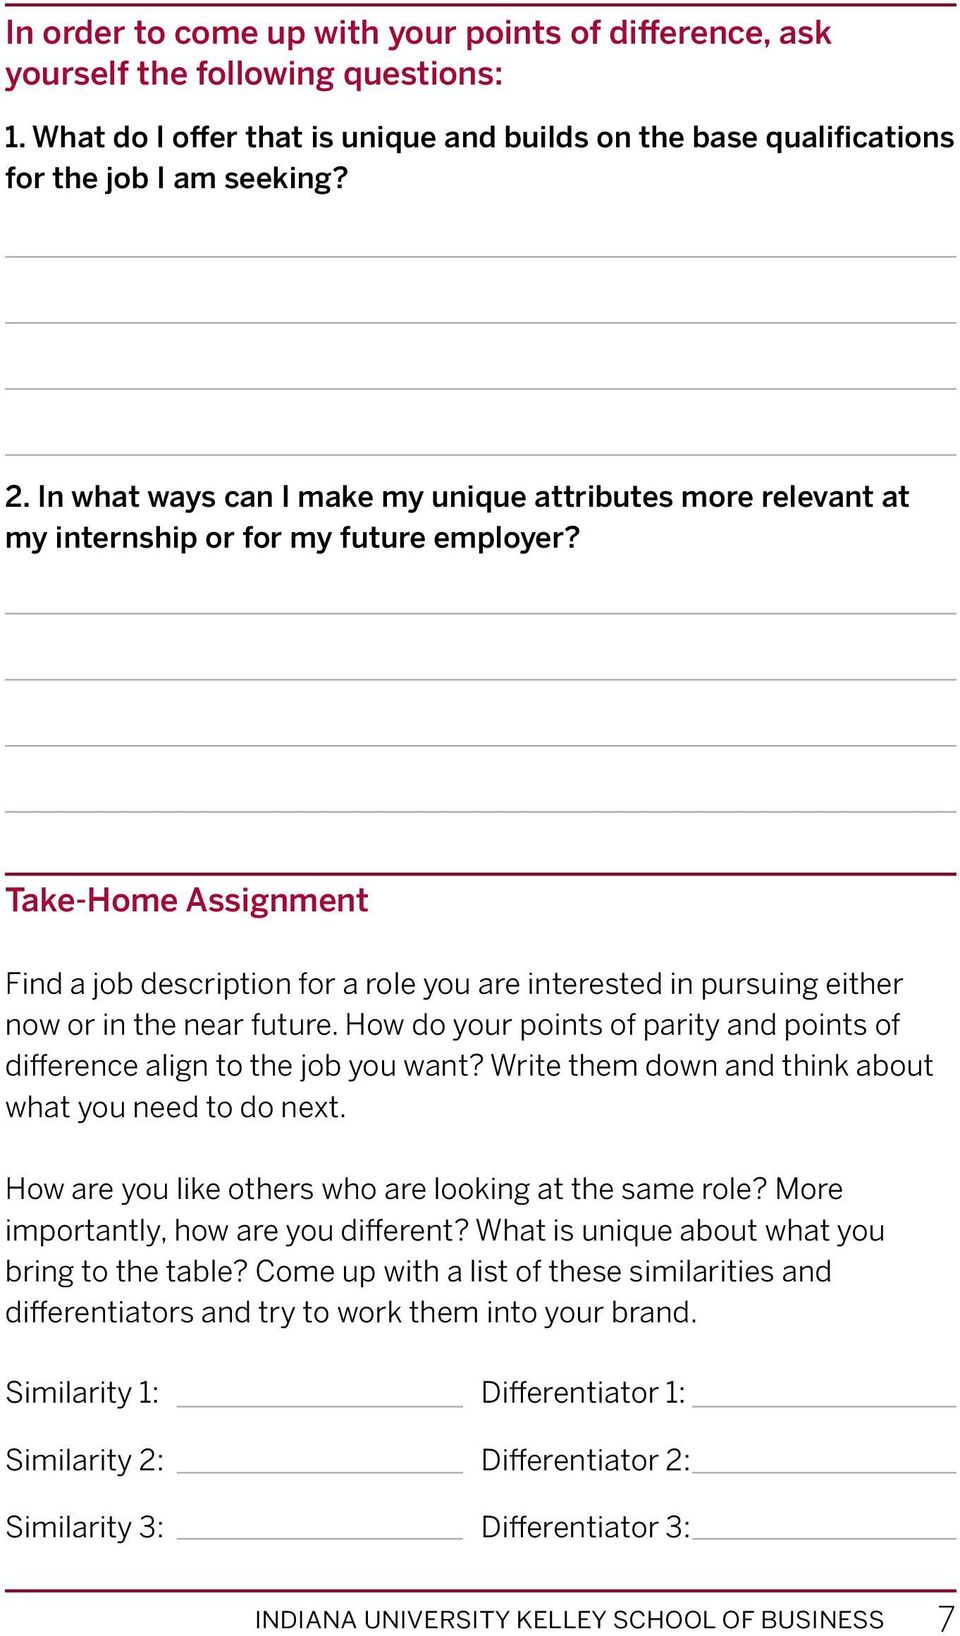 Take-Home Assignment Find a job description for a role you are interested in pursuing either now or in the near future. How do your points of parity and points of difference align to the job you want?